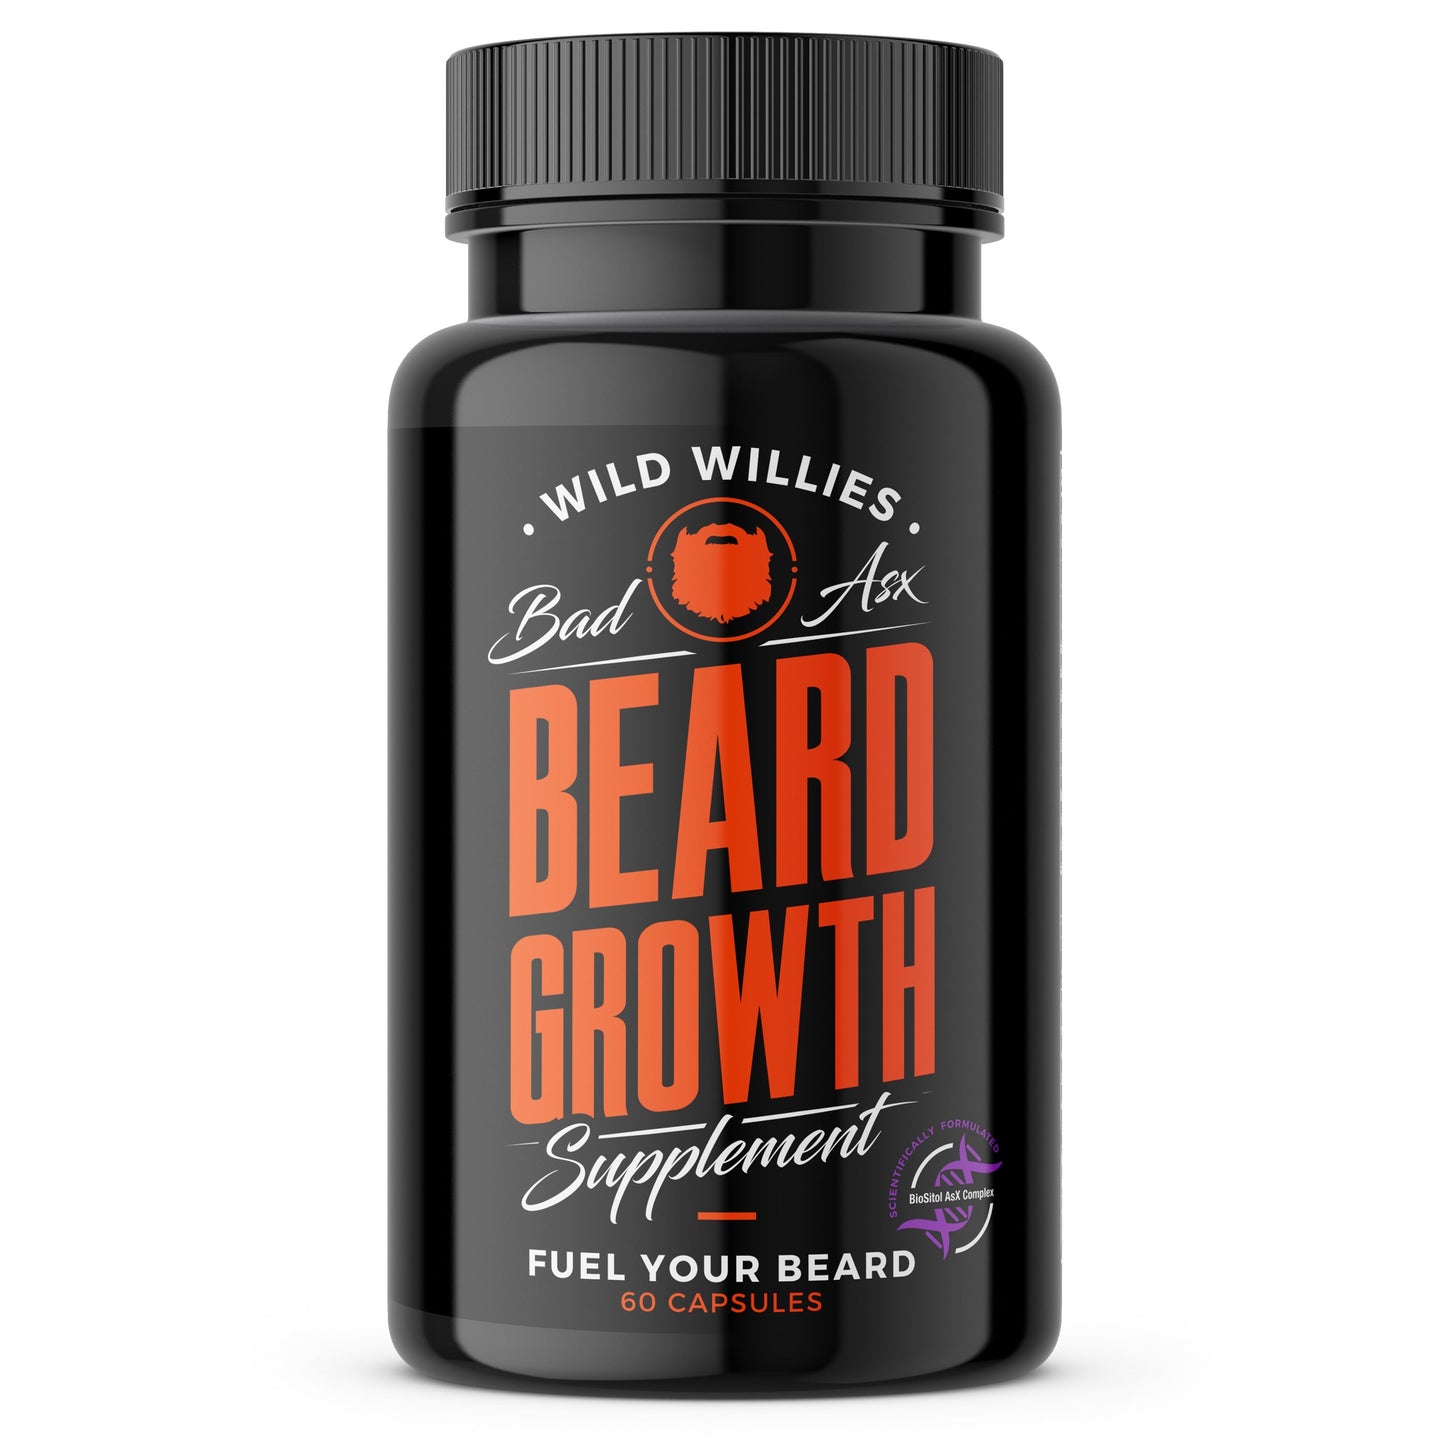 Wild-Willies Beard Growth Supplement Capsules - Front